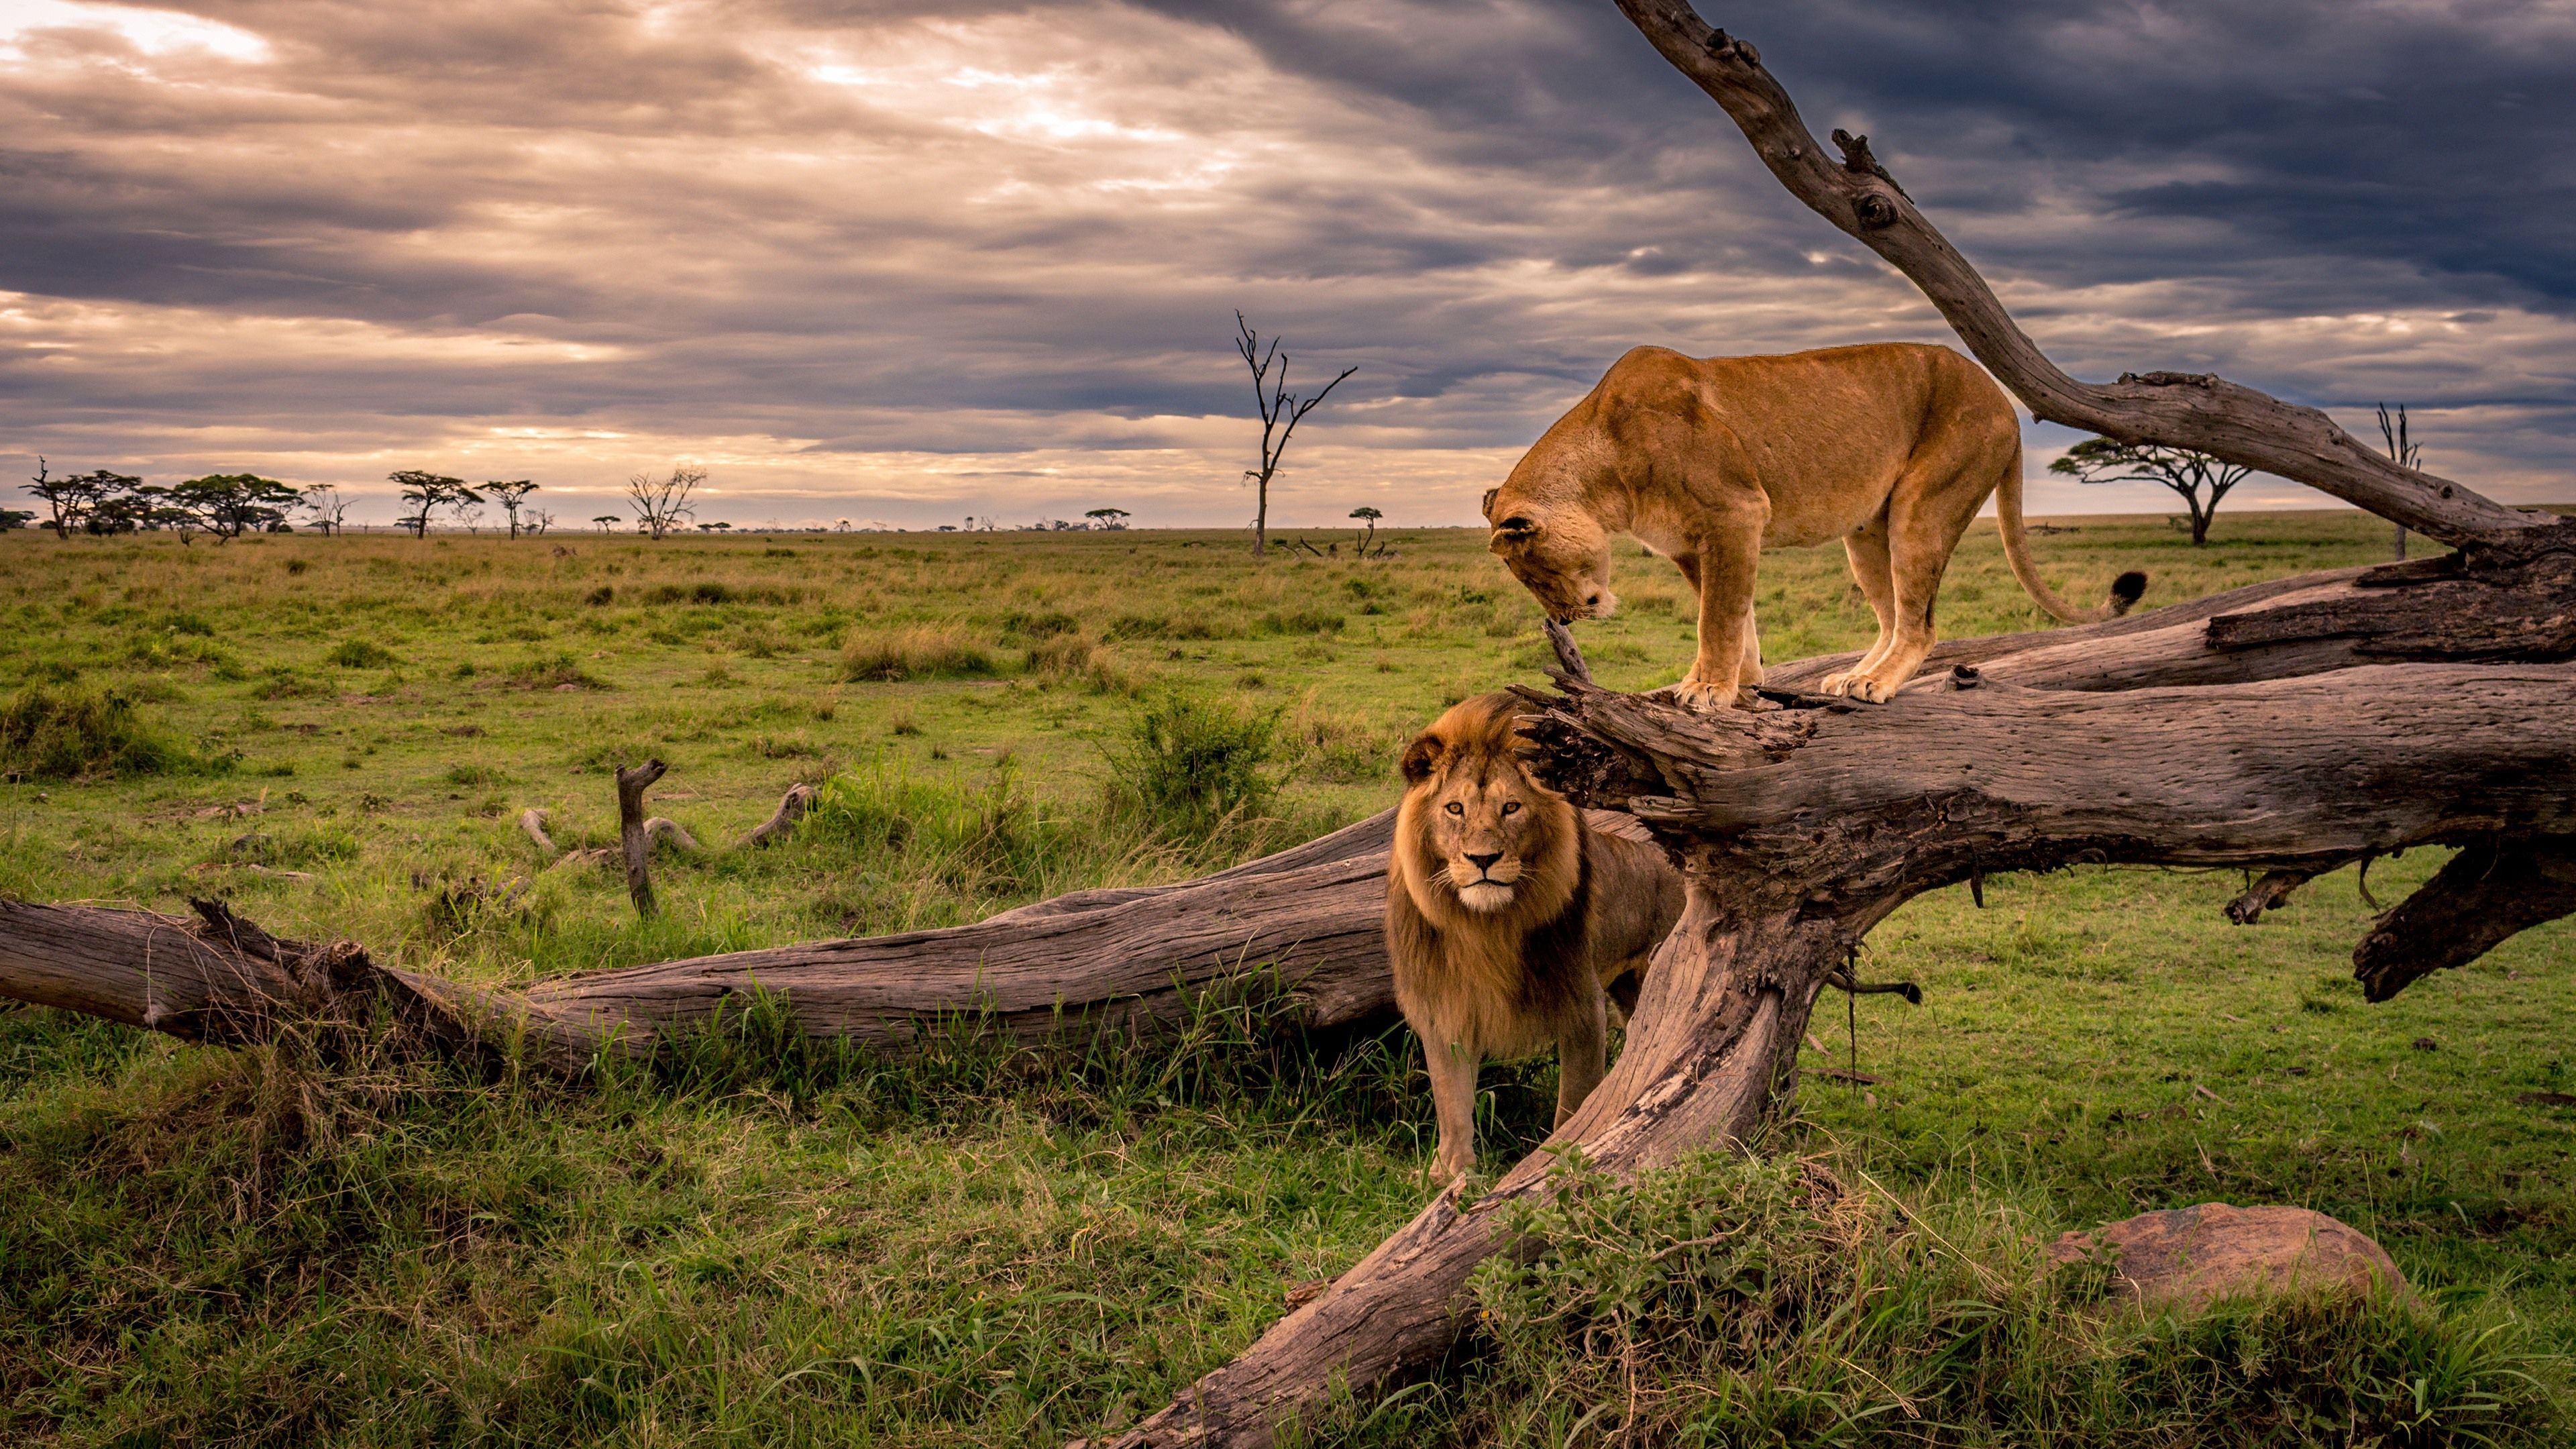 Wallpaper Lion and lioness, Africa, wildlife 3840x2160 UHD 4K Picture, Image